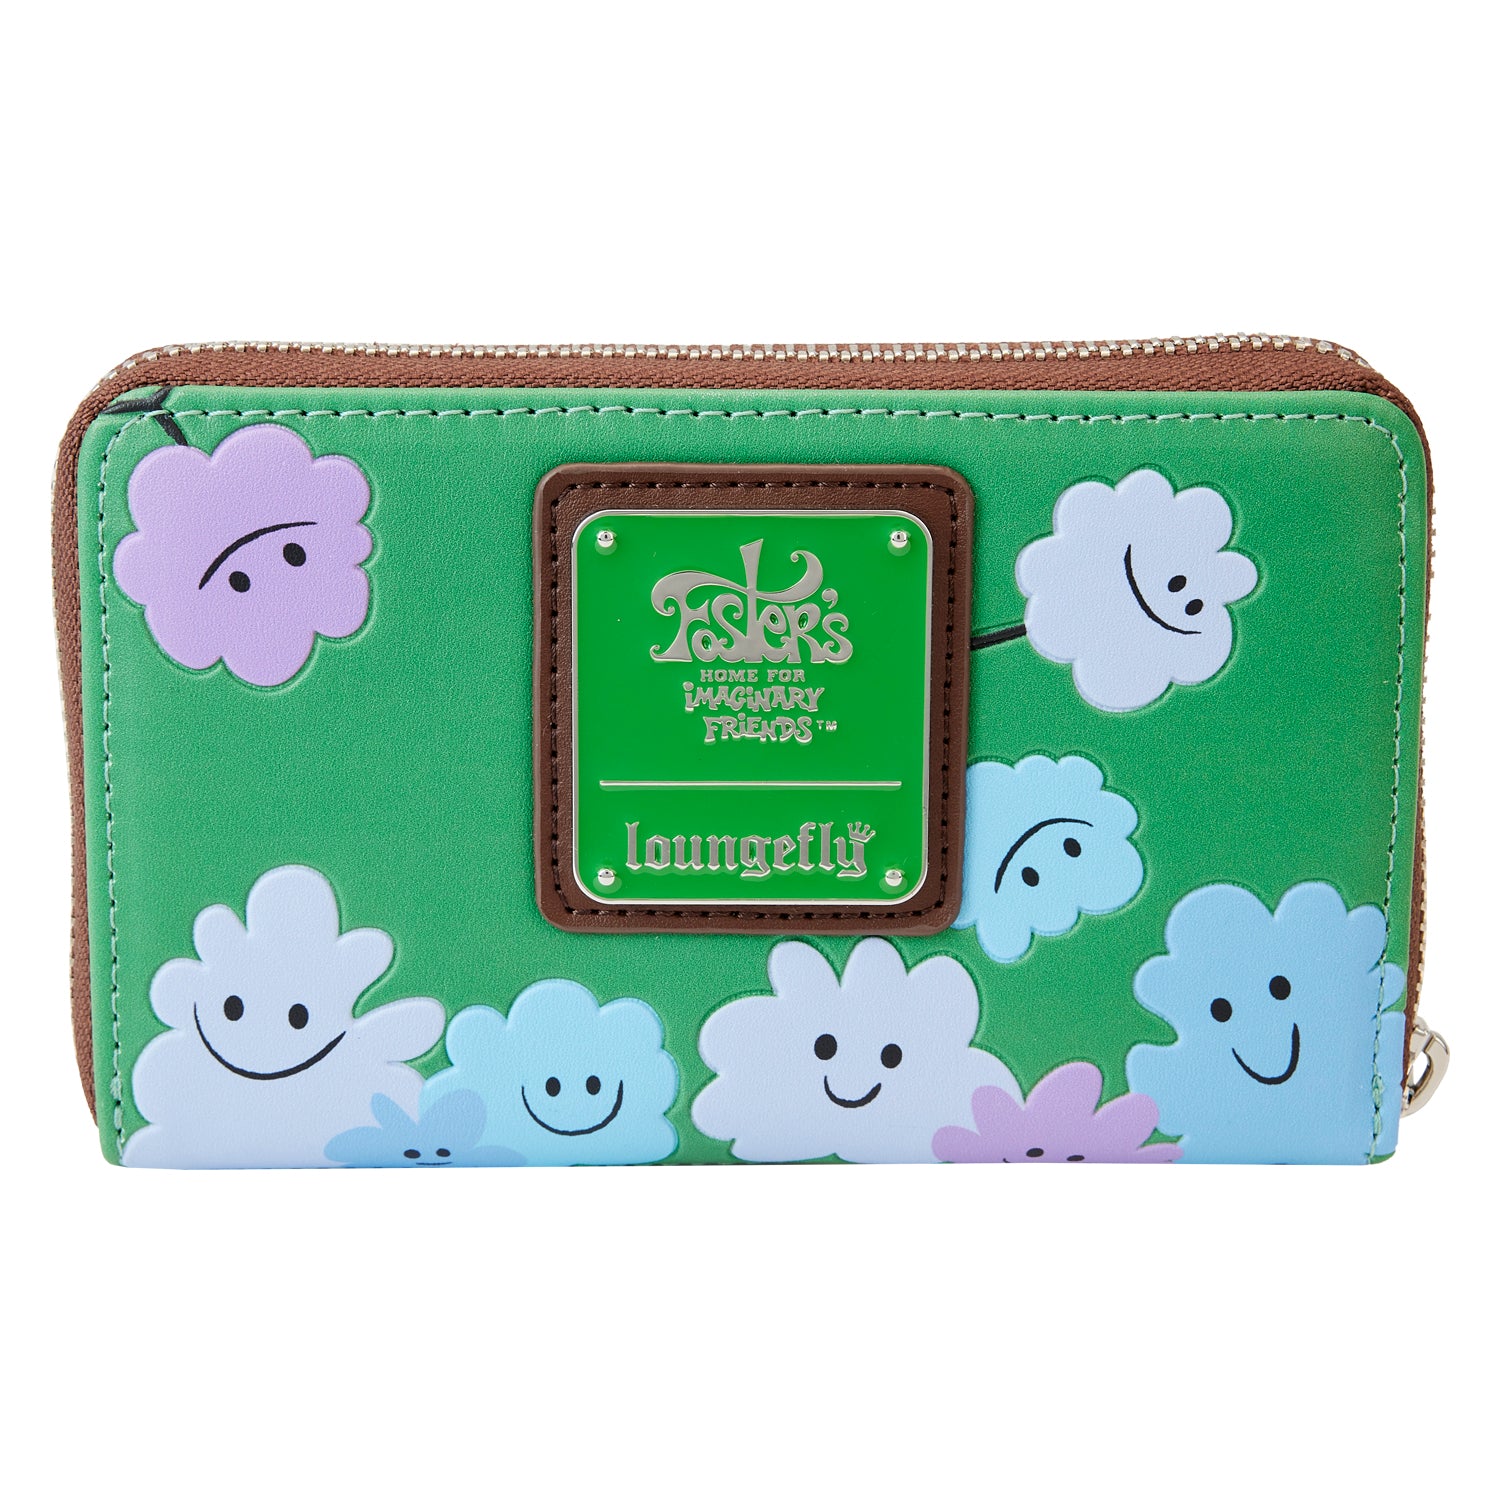 Loungefly Cartoon Network Fosters Home for Imaginary Friends Mac and Blue Ziparound Wallet